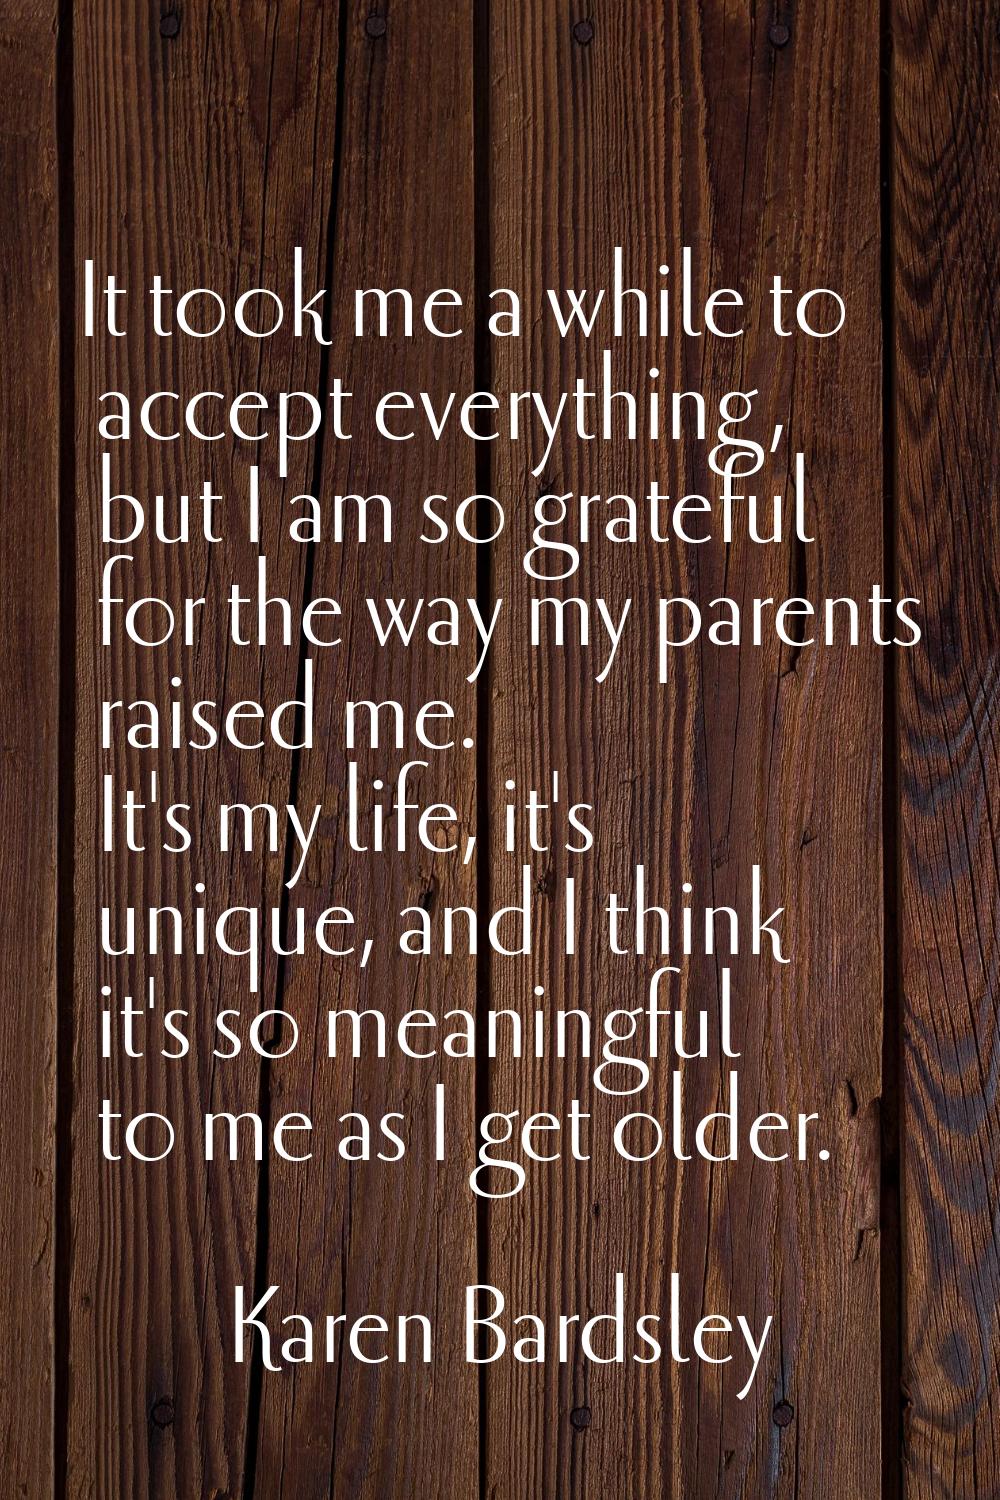 It took me a while to accept everything, but I am so grateful for the way my parents raised me. It'